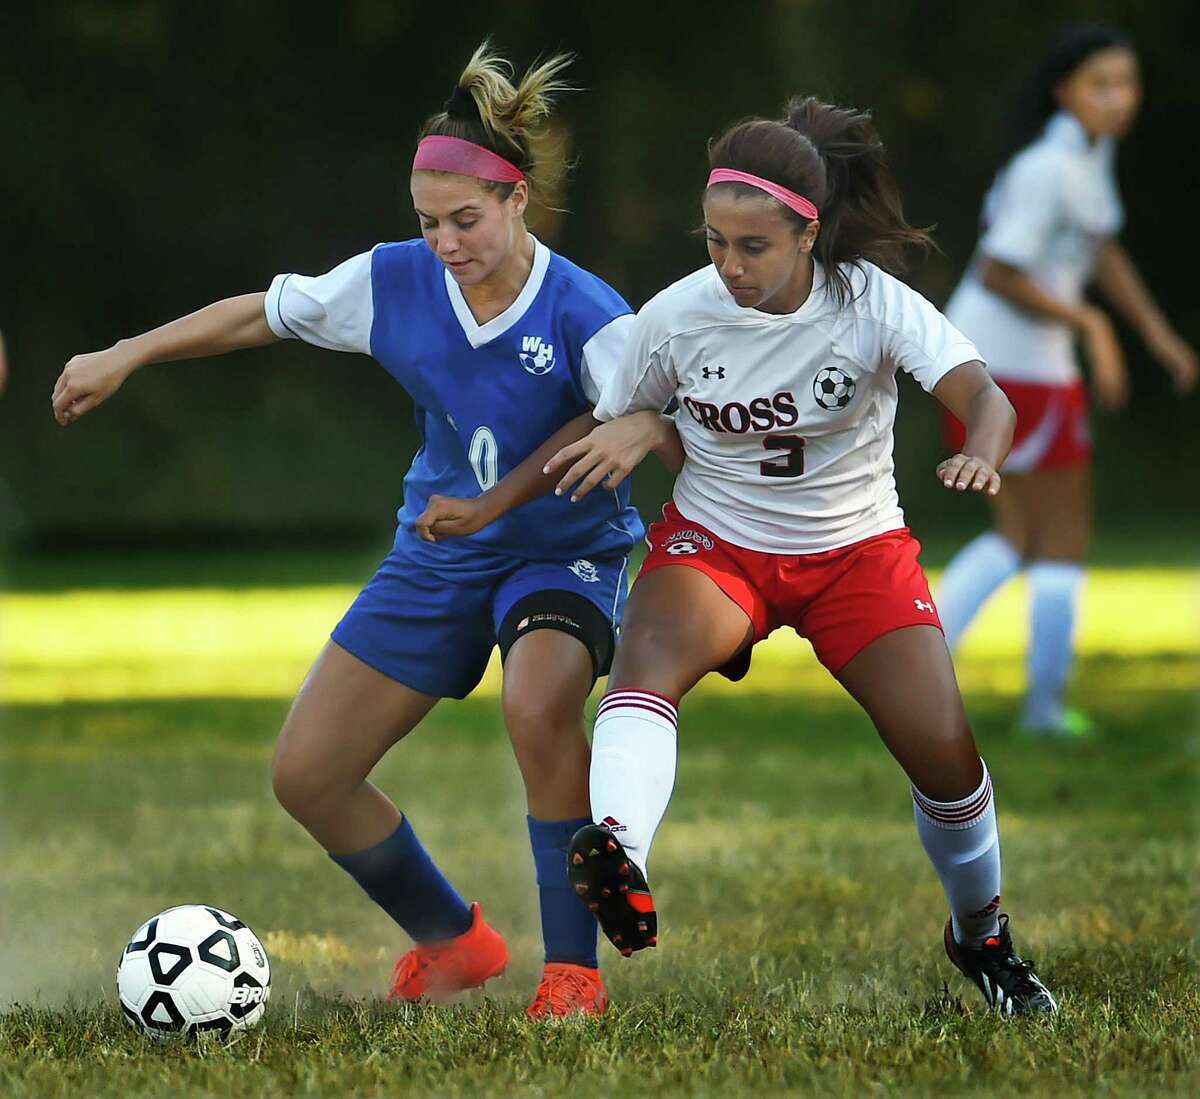 West Haven’s Gabriella Prisco battles Wilbur Cross’ Angelica Rodriguez, Tuesday, September 13, 2016, in a 5-2 win for the Blue Devils at Rice Field at East Rock Park in New Haven. (Catherine Avalone/New Haven Register)